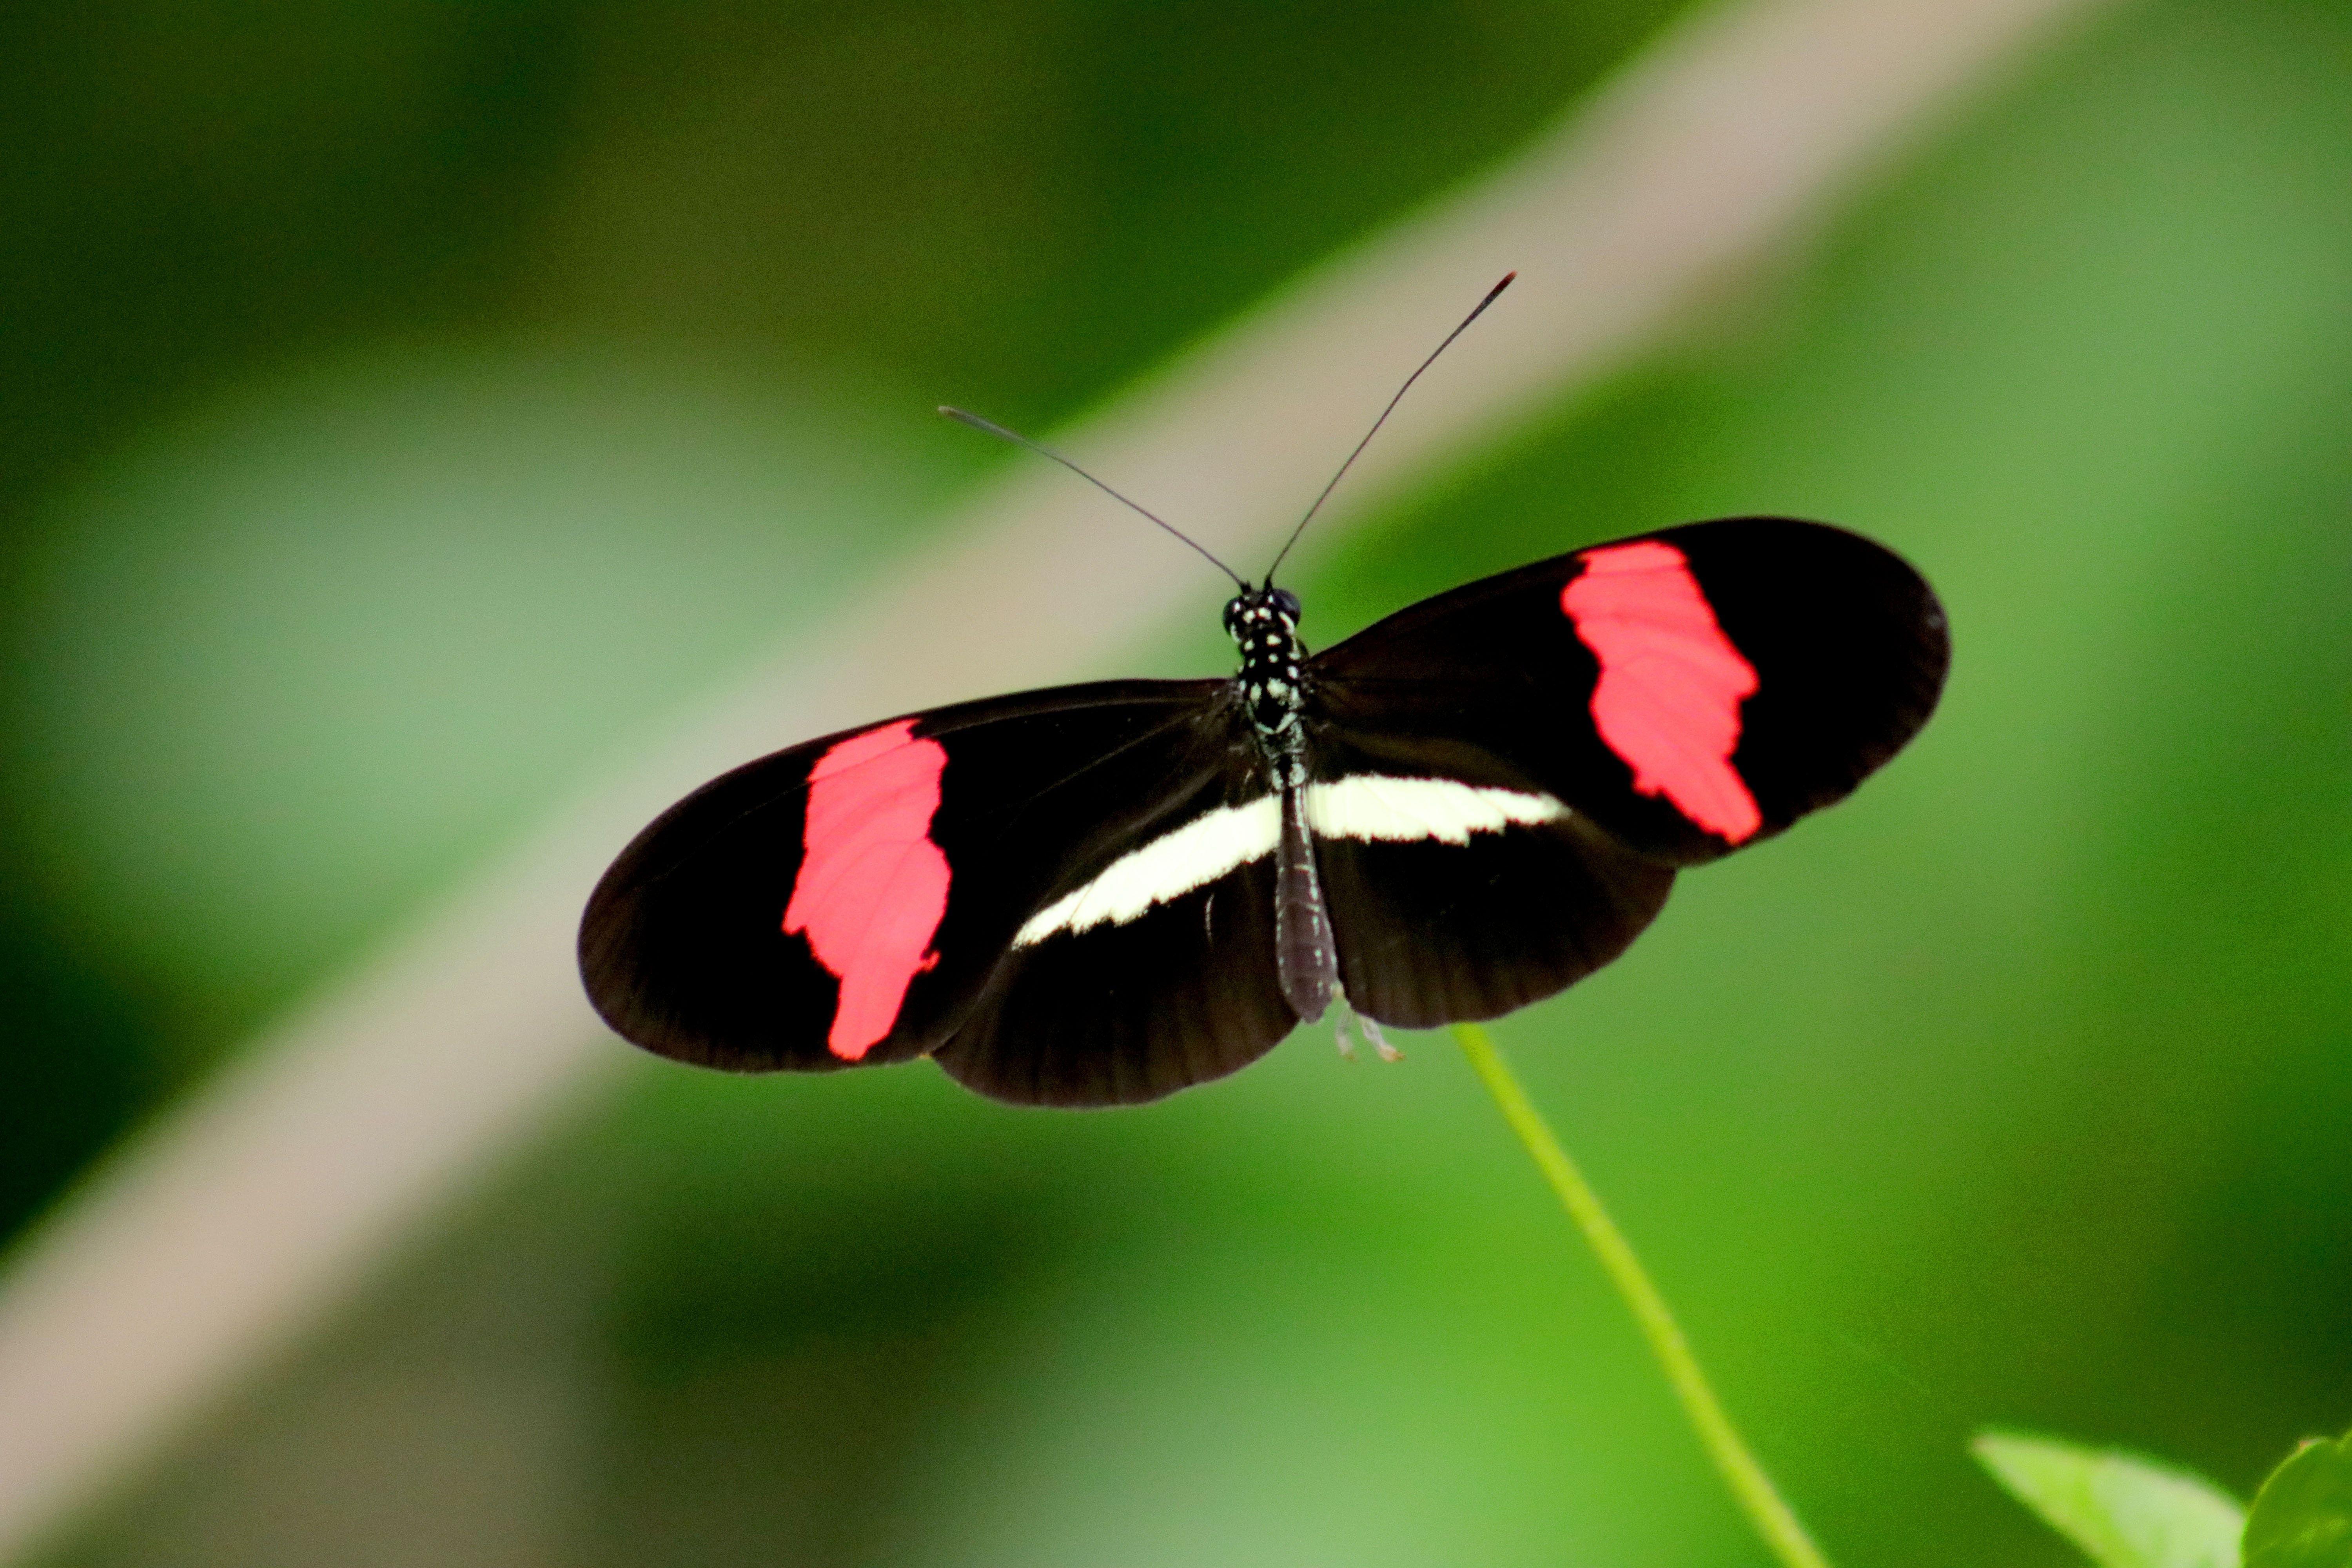 Black and Red Butterfly Logo - Black, Red, and White Butterfly in Closeup Photo · Free